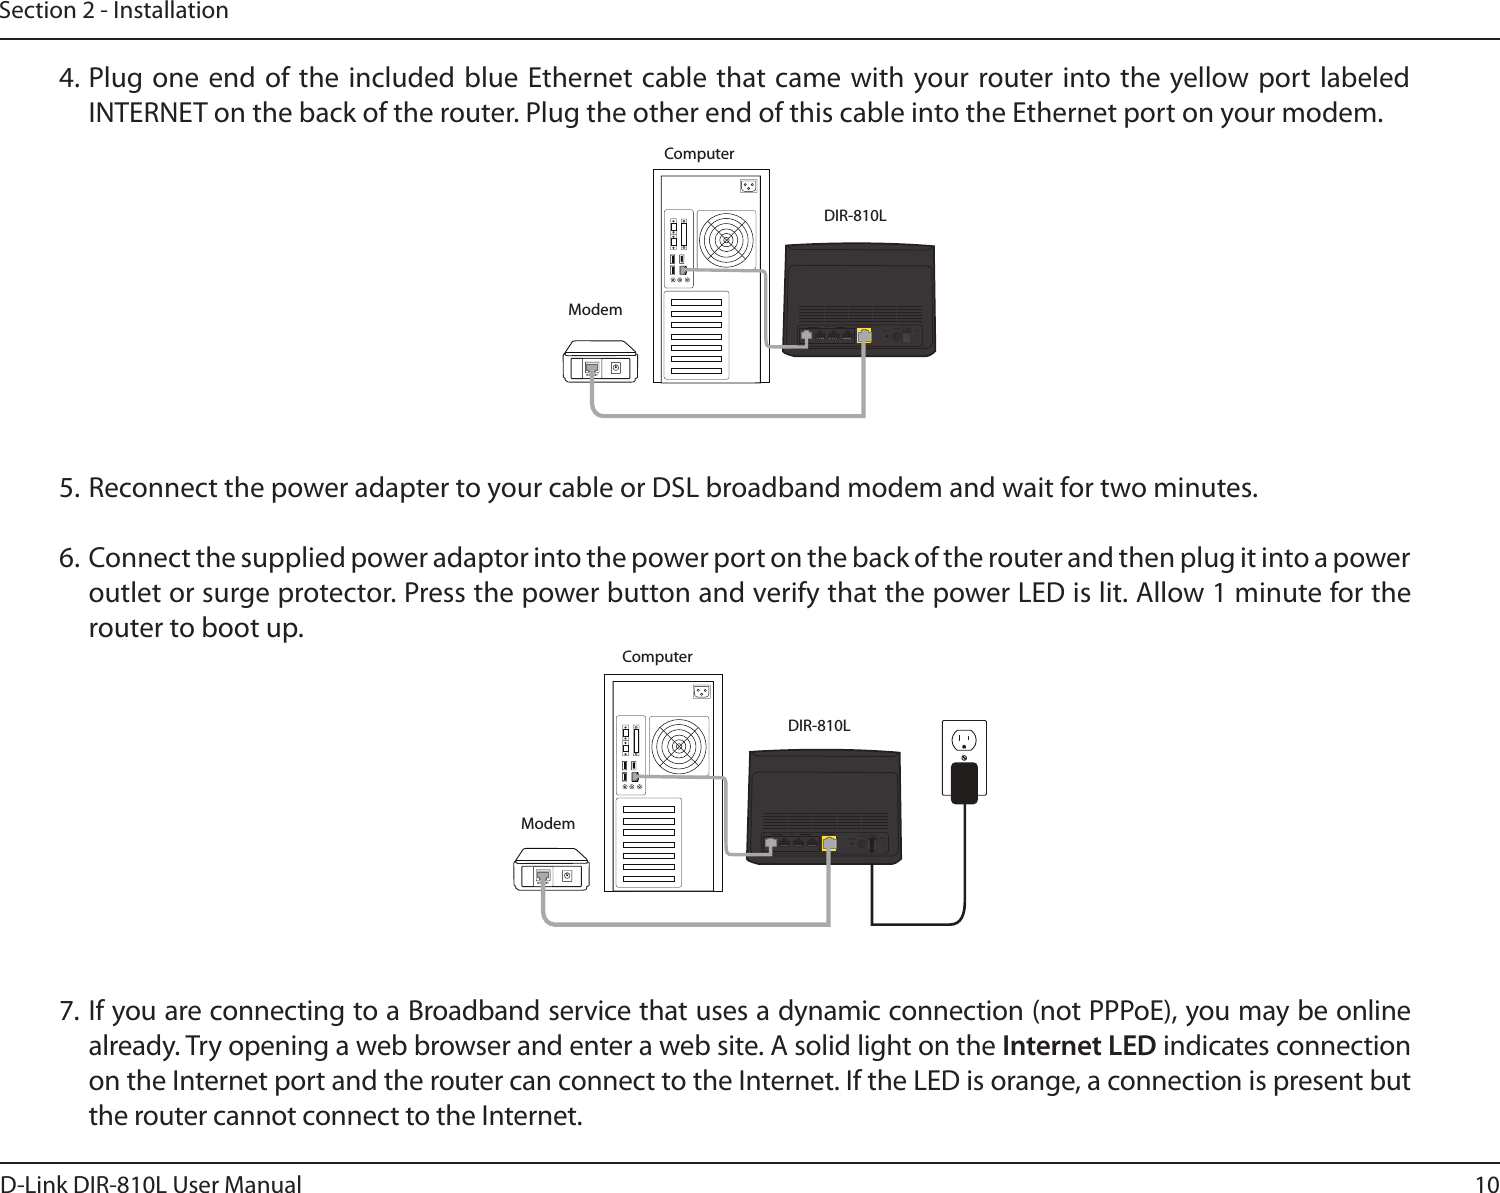 10D-Link DIR-810L User ManualSection 2 - InstallationDIR-810LModemINTERNETLANRESETINTERNET1234 12V   1APOWERWPS4. Plug one end  of the  included blue  Ethernet cable  that came with your router into the yellow port labeled INTERNET on the back of the router. Plug the other end of this cable into the Ethernet port on your modem.5. Reconnect the power adapter to your cable or DSL broadband modem and wait for two minutes.6. Connect the supplied power adaptor into the power port on the back of the router and then plug it into a power outlet or surge protector. Press the power button and verify that the power LED is lit. Allow 1 minute for the router to boot up. 7. If you are connecting to a Broadband service that uses a dynamic connection (not PPPoE), you may be online already. Try opening a web browser and enter a web site. A solid light on the Internet LED indicates connection on the Internet port and the router can connect to the Internet. If the LED is orange, a connection is present but the router cannot connect to the Internet.DIR-810LModemComputerComputerINTERNETLANRESETINTERNET1234 12V   1APOWERWPS